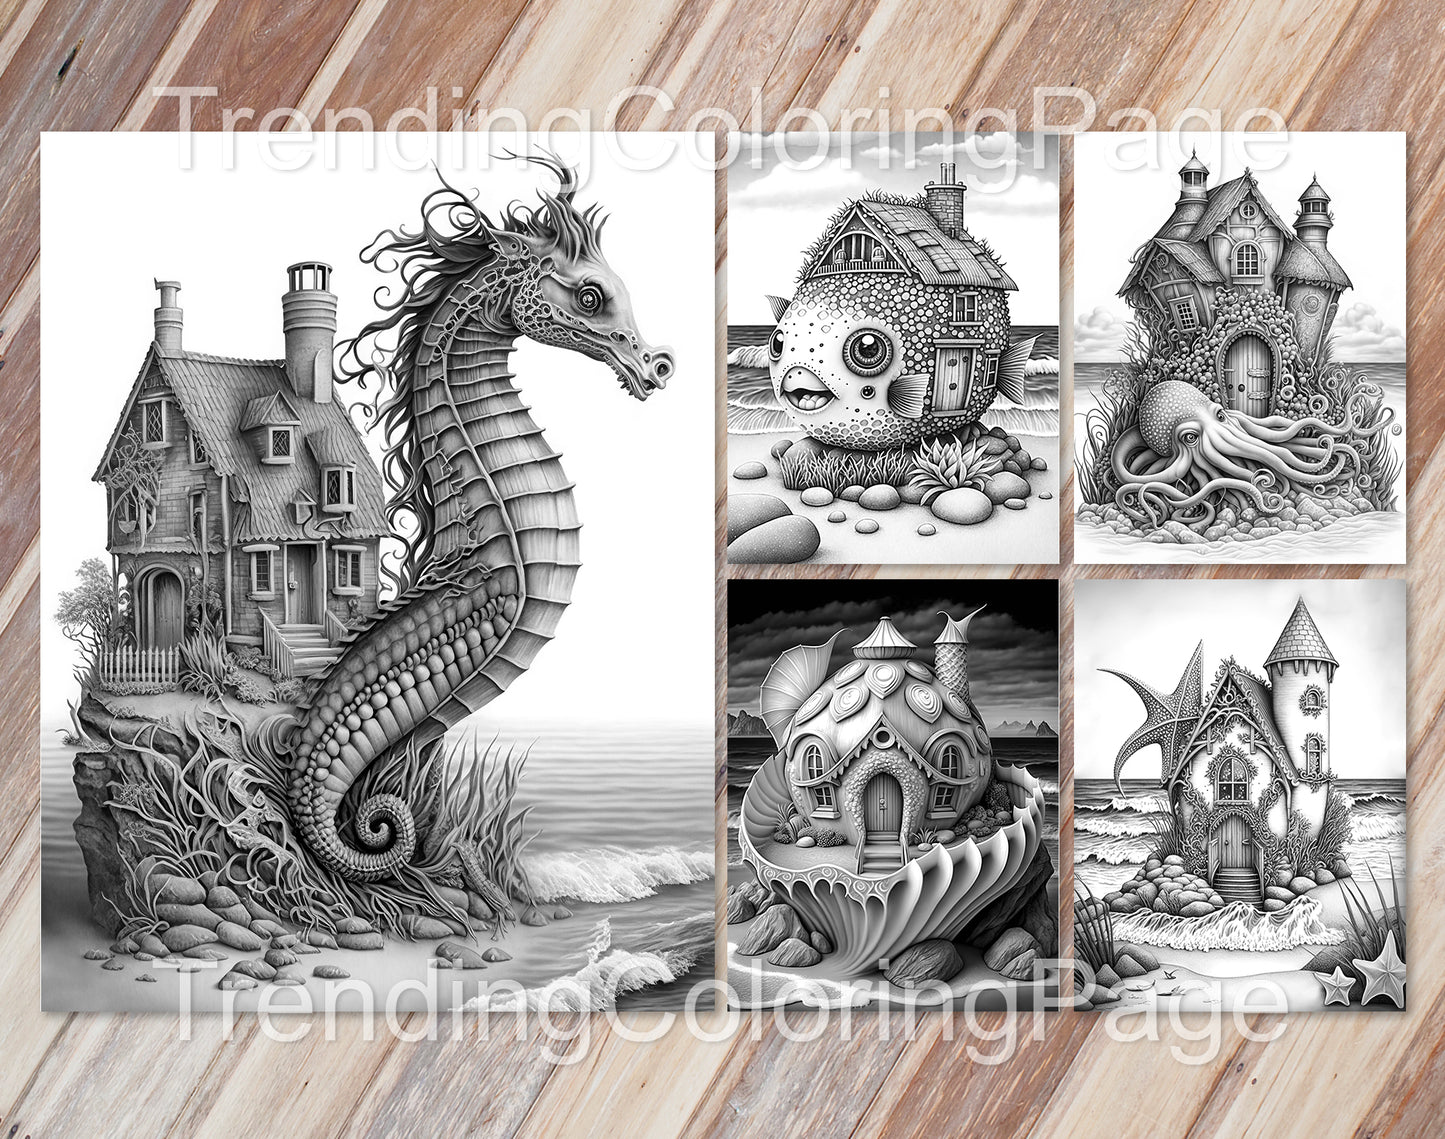 25 Fantasy Ocean Houses Grayscale Coloring Pages - Instant Download - Printable Dark/Light